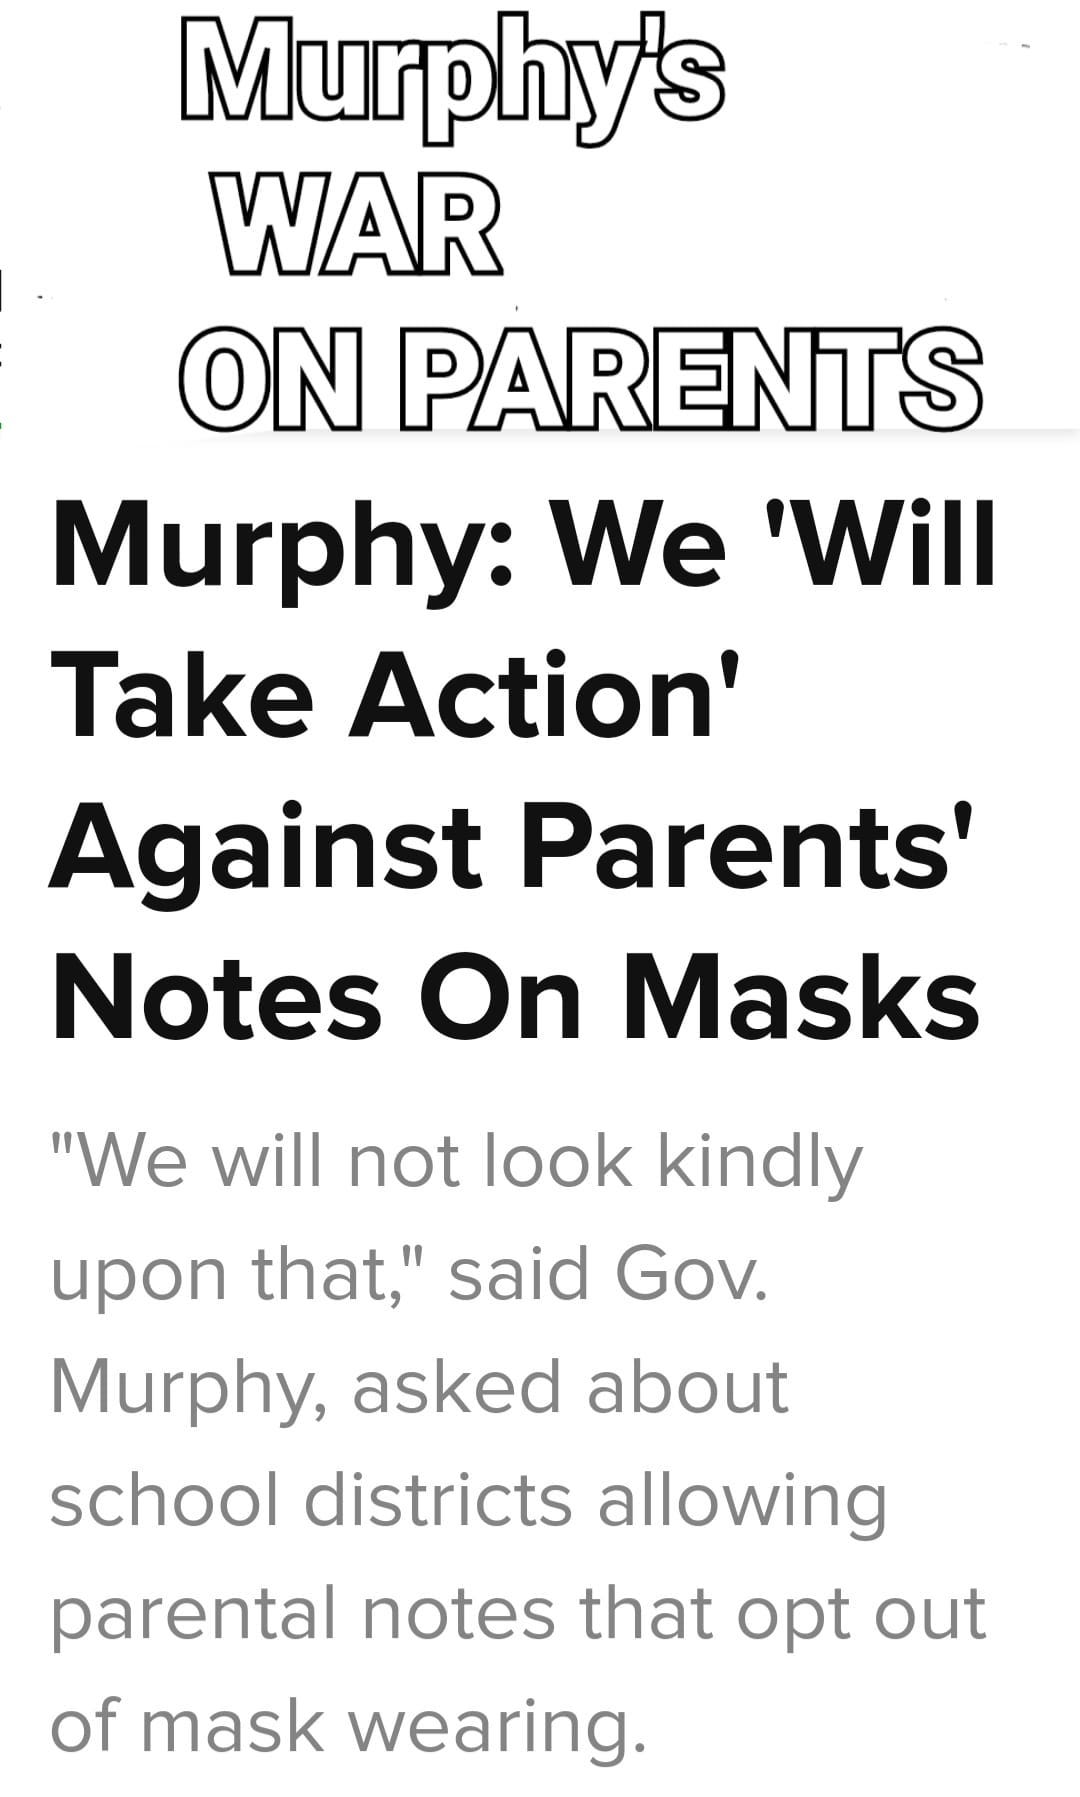 May be an image of text that says 'Murphy's WAR ON PARENTS Murphy: We 'Will Take Action' Against Parents' Notes On Masks "We will not look kindly upor that,' said Gov. Murphy, asked about school districts allowing parental notes that opt out of mask wearing.'